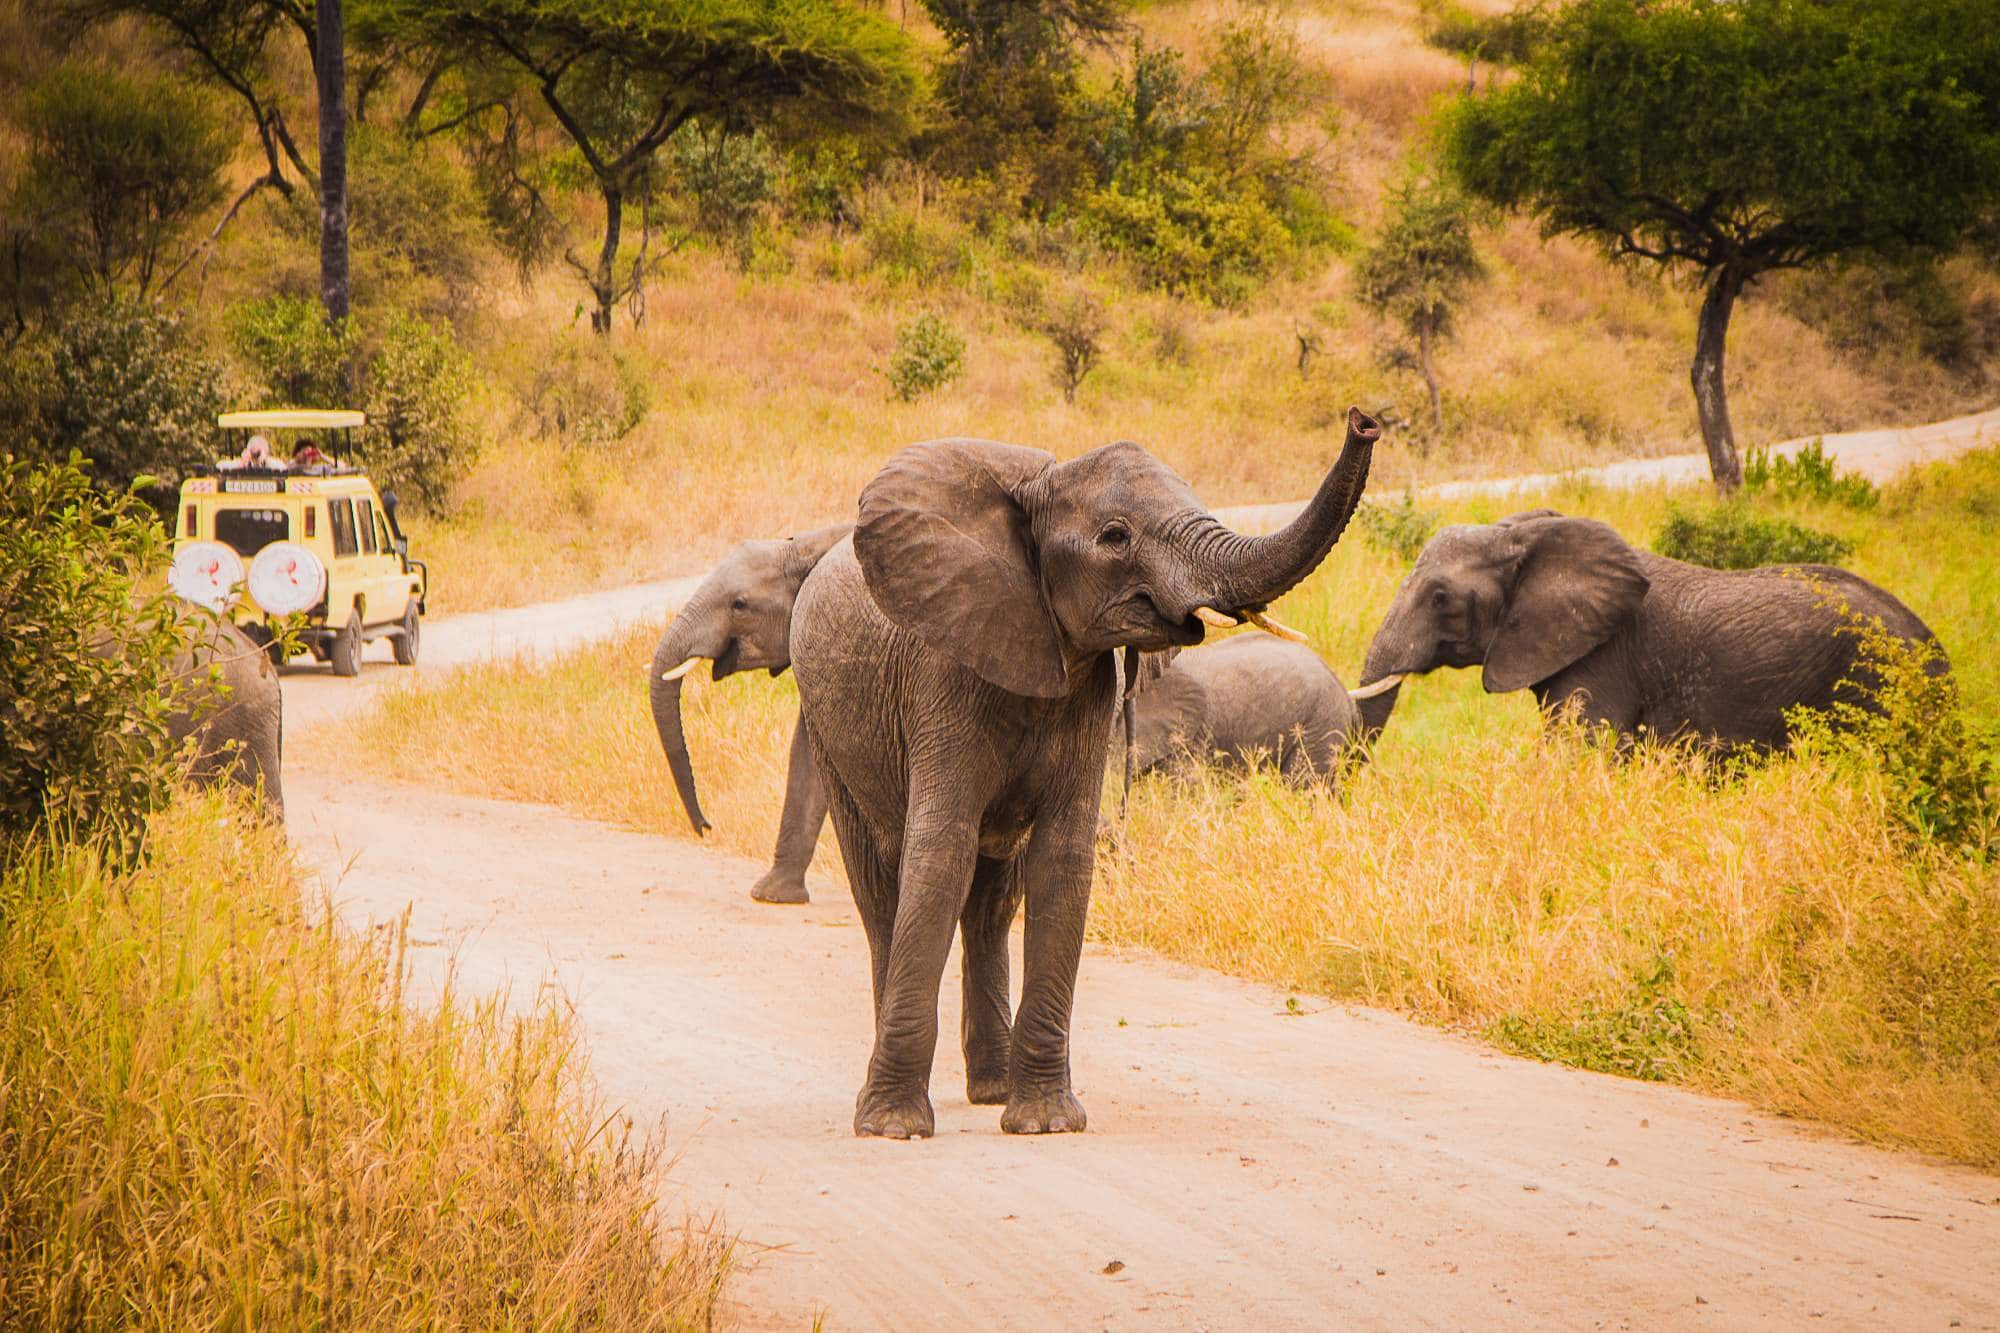 Five Things to Consider Before Planning Your South African Safari